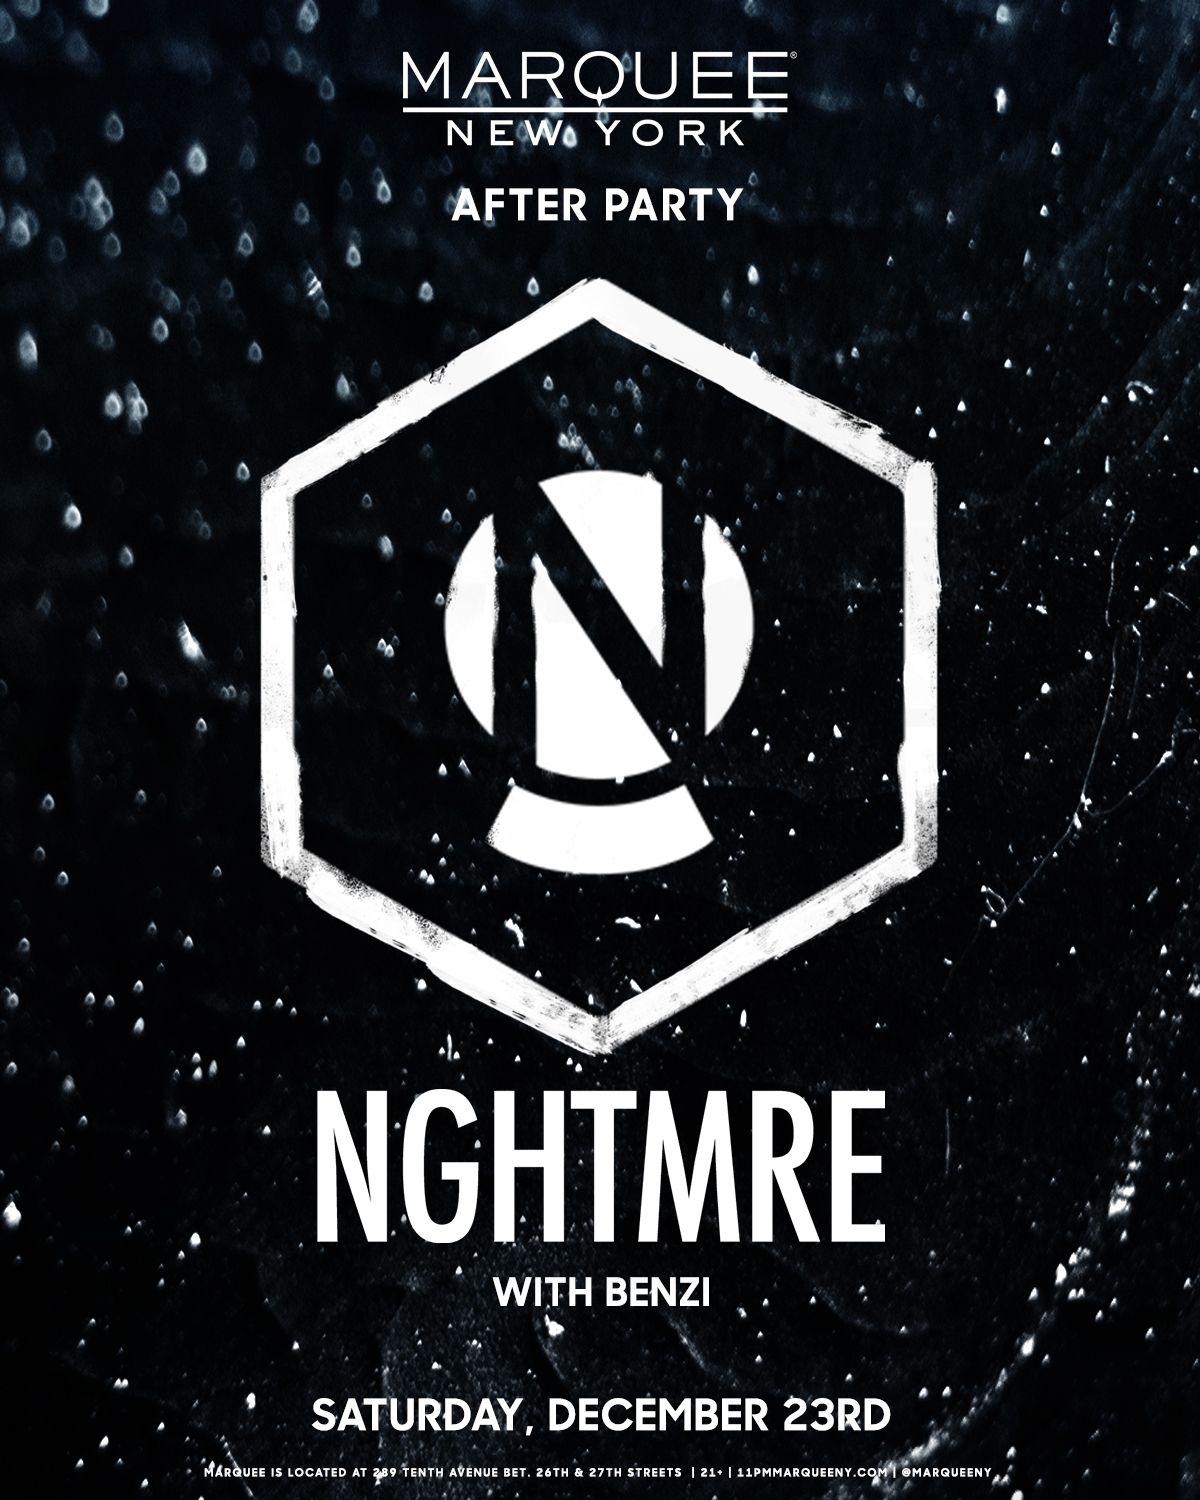 New York DJ Logo - Official Site of Marquee New York Nightclub - NGHTMRE